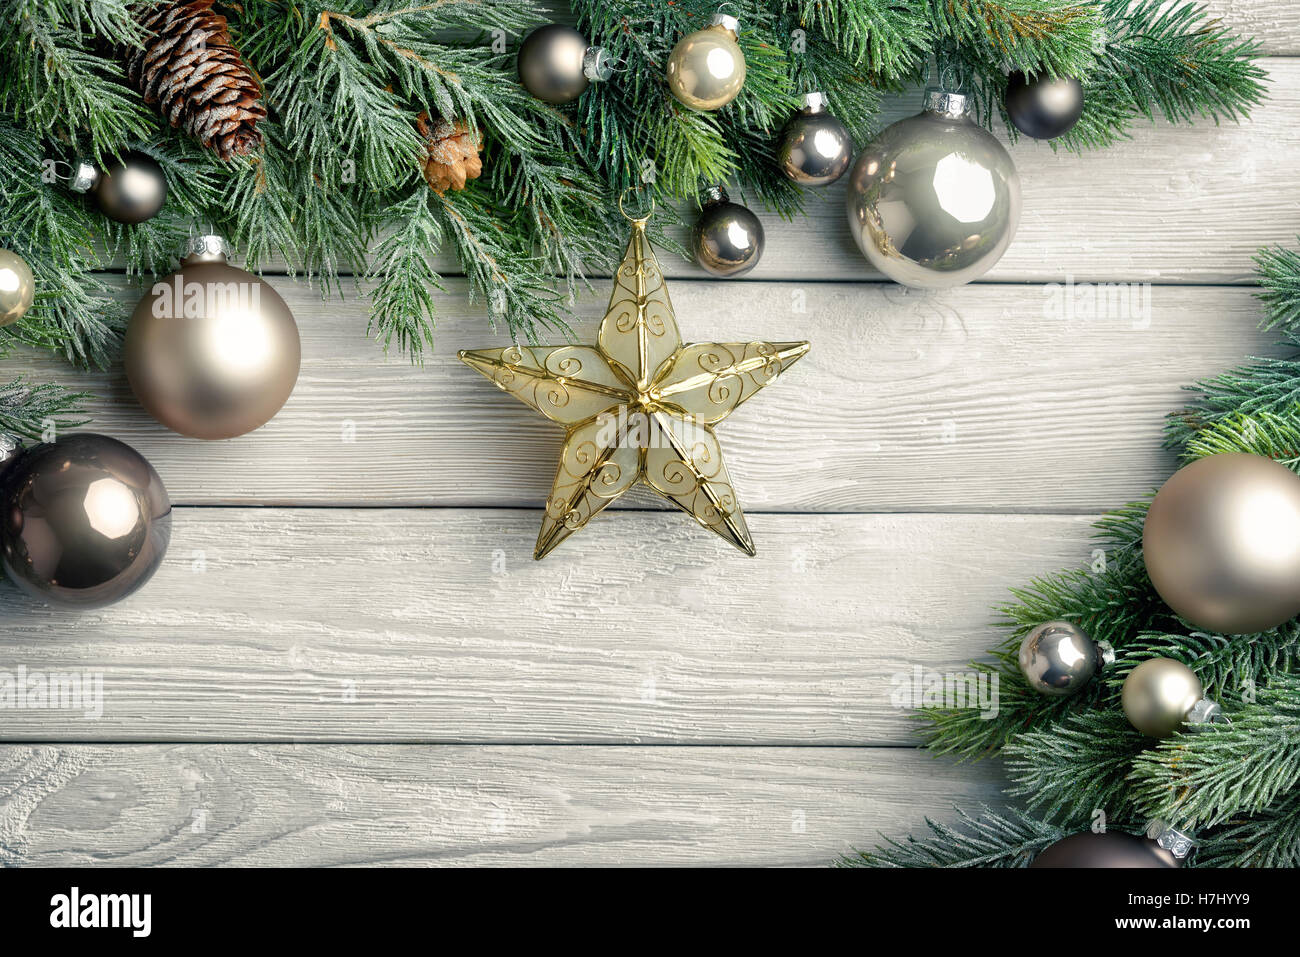 Christmas background with bright wooden board and fir branches decorated with silver baubles and a gold star - modern, simple an Stock Photo